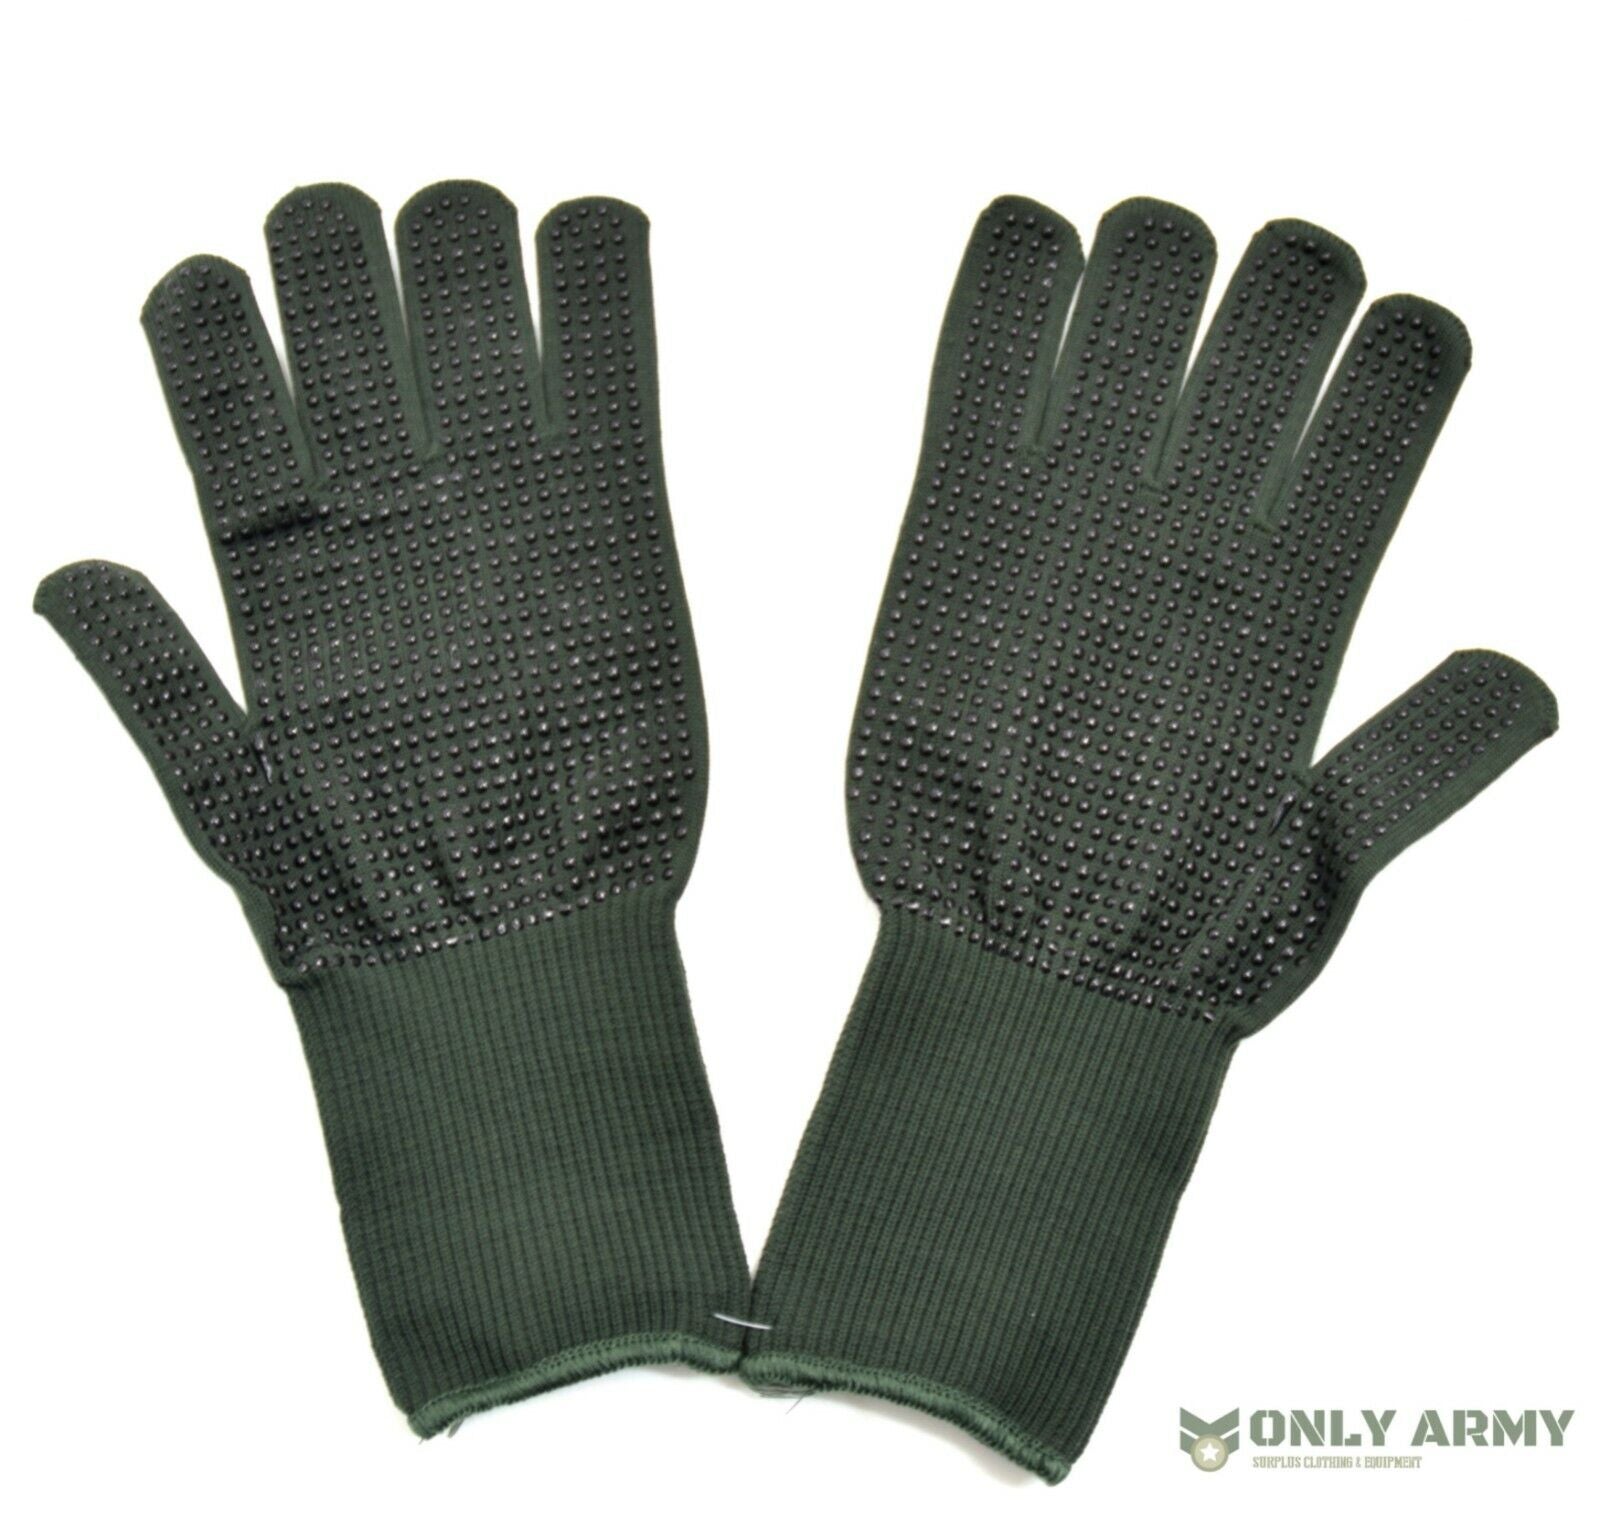 NEW - British Army Issue Grip Gloves Combat Contact Gripper Glove ARAMID Olive 